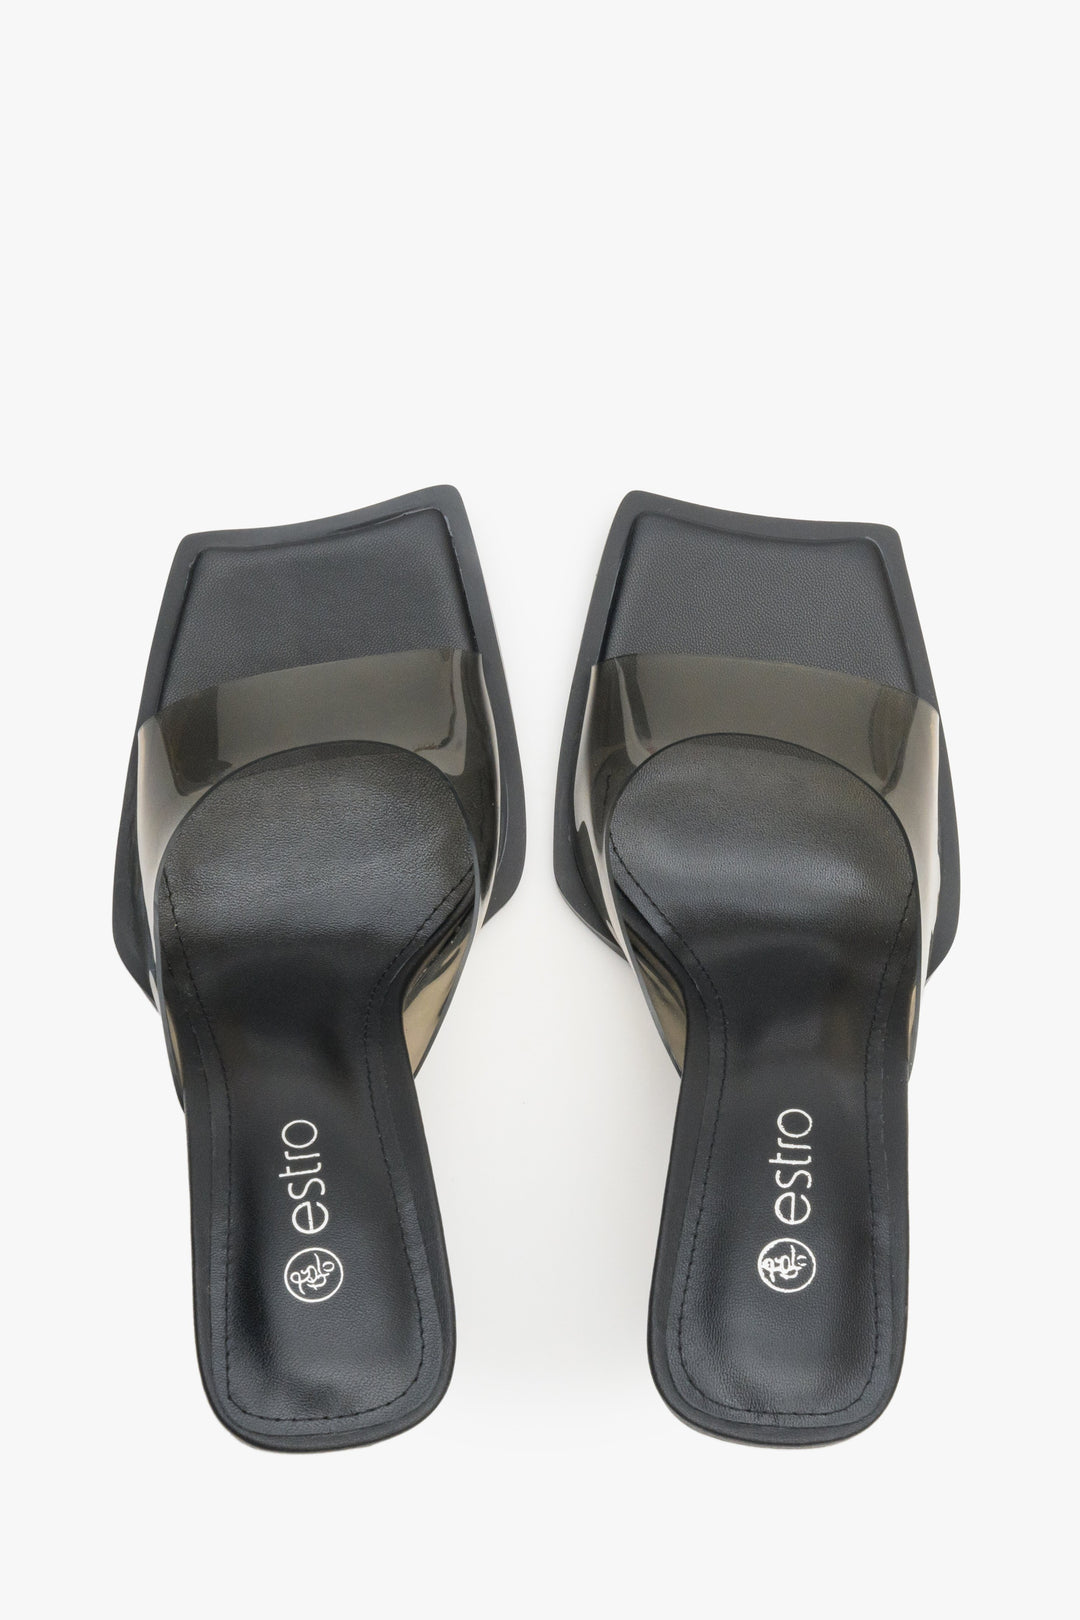 Womens's high-heeled sandals with a transparent strap and black sole - top view model presentation.